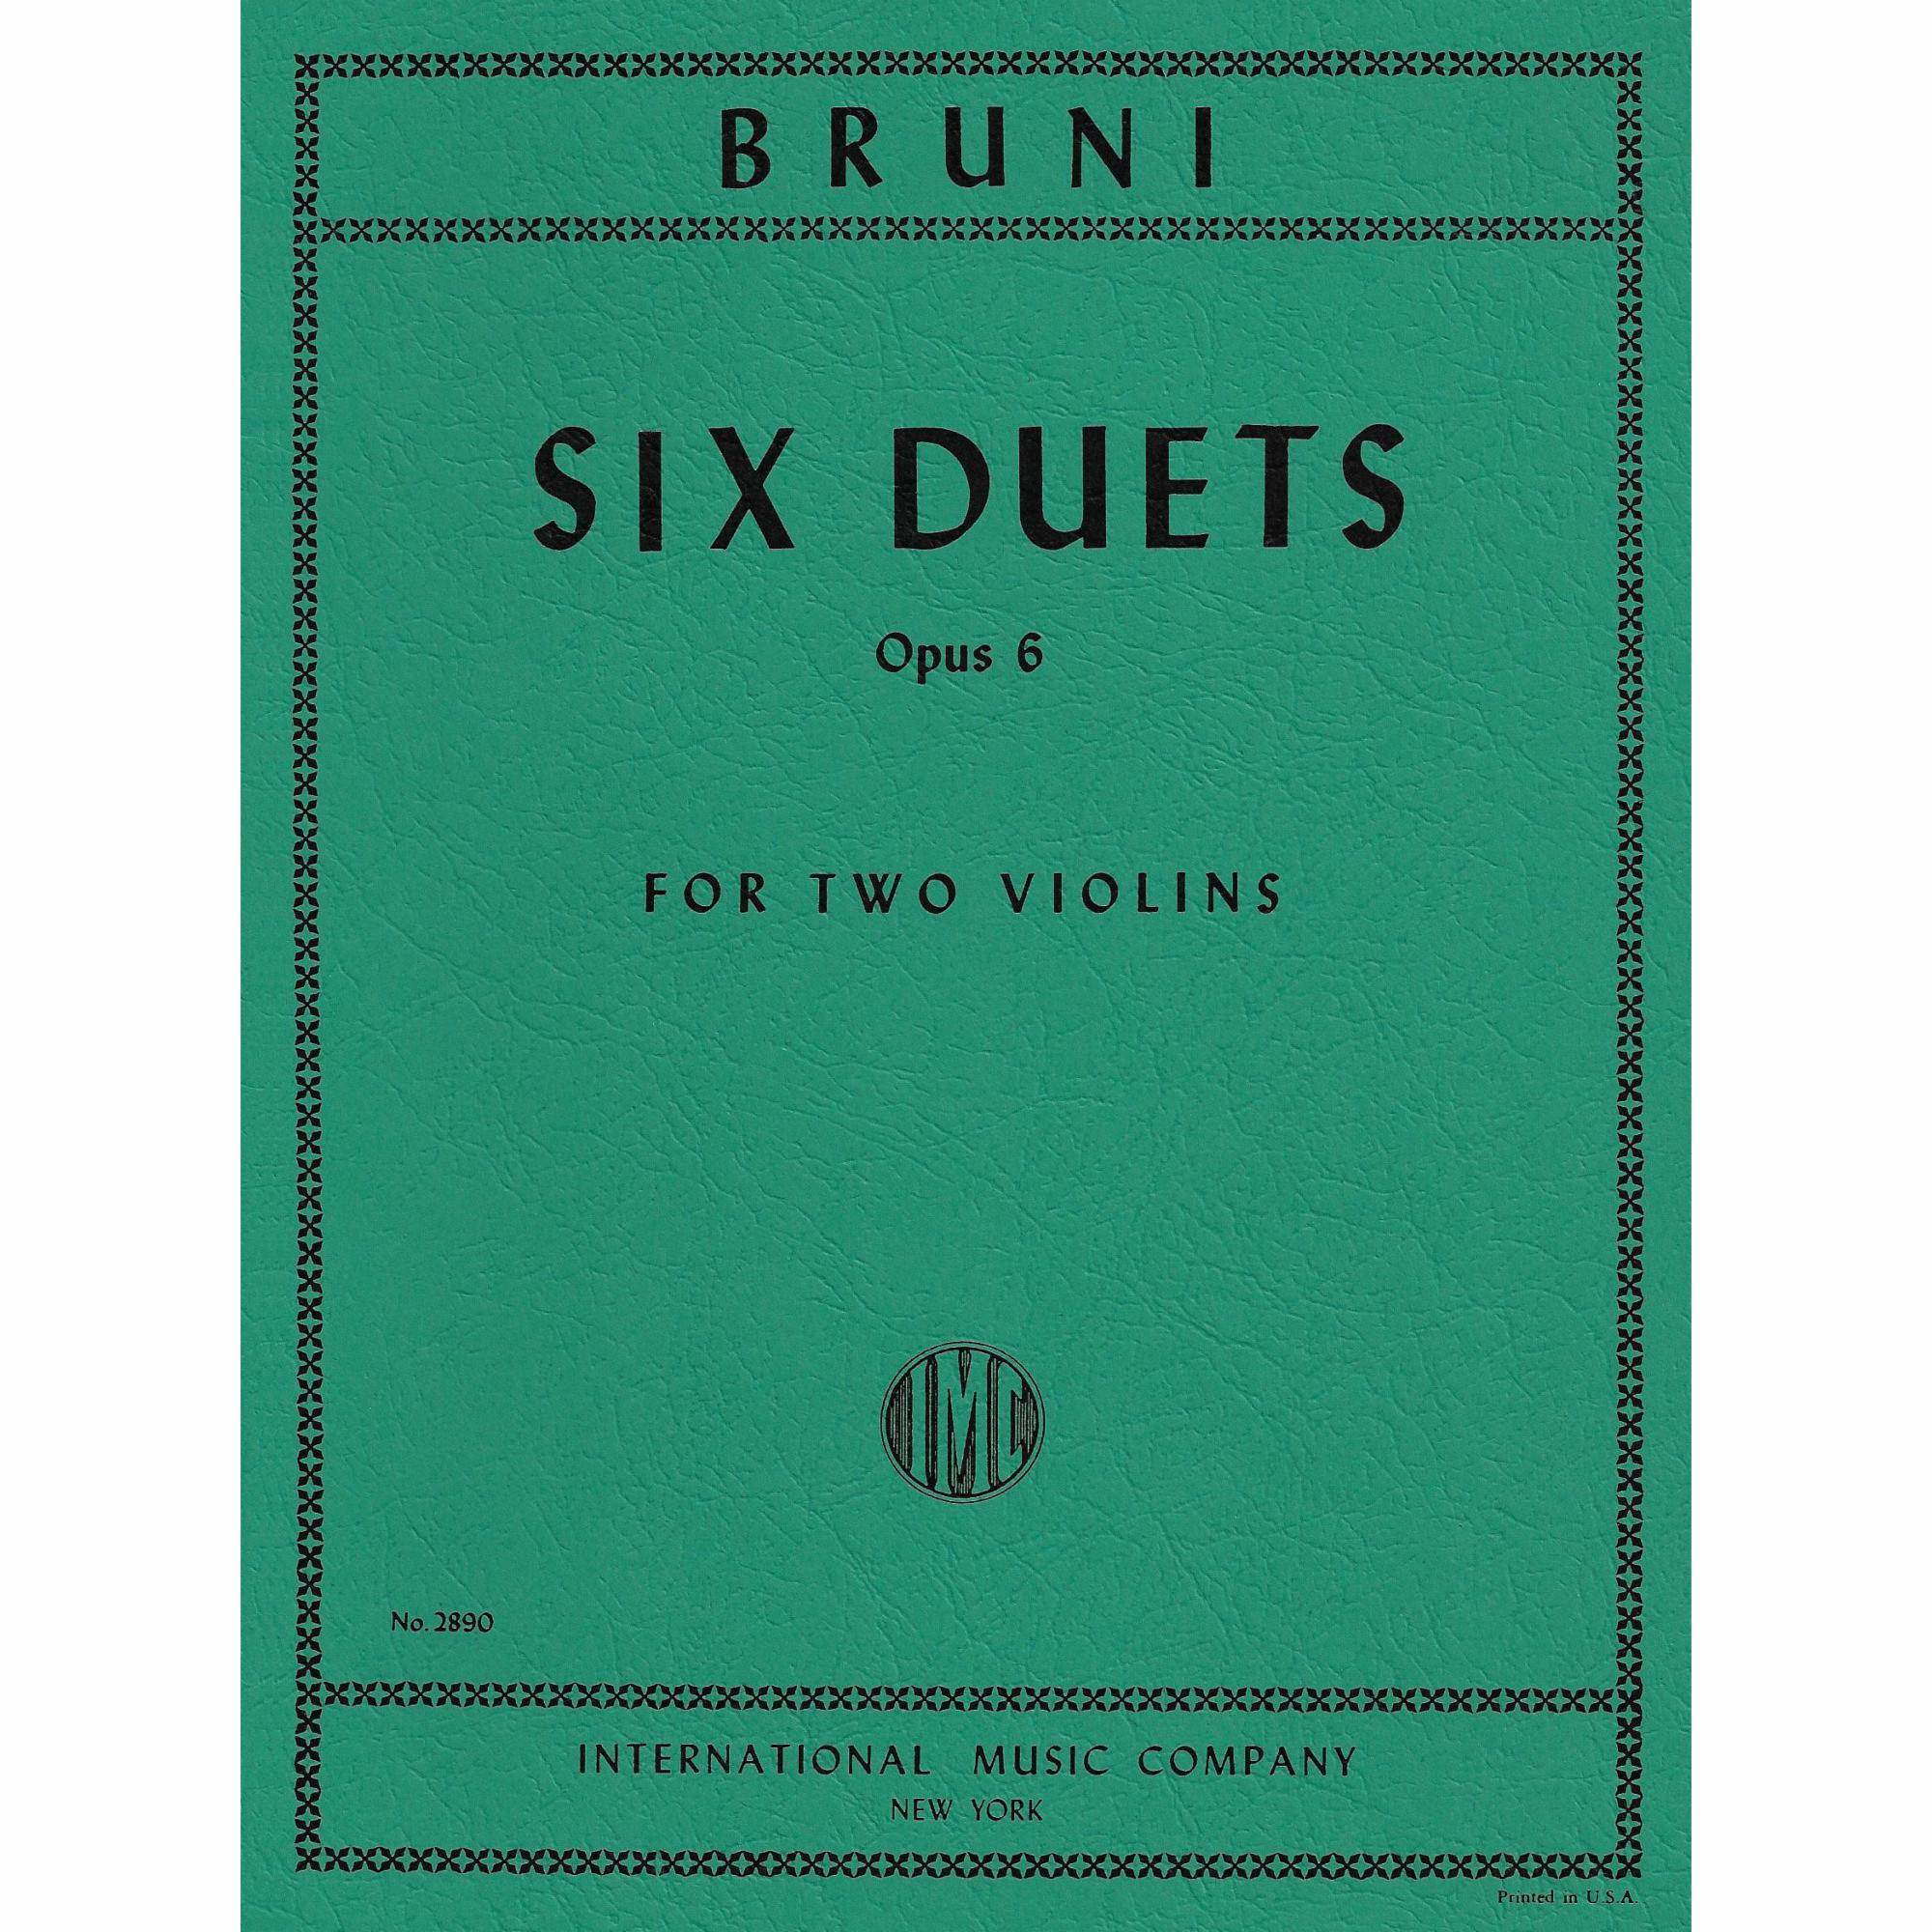 Bruni -- Six Duets Op. 6 for Two Violins